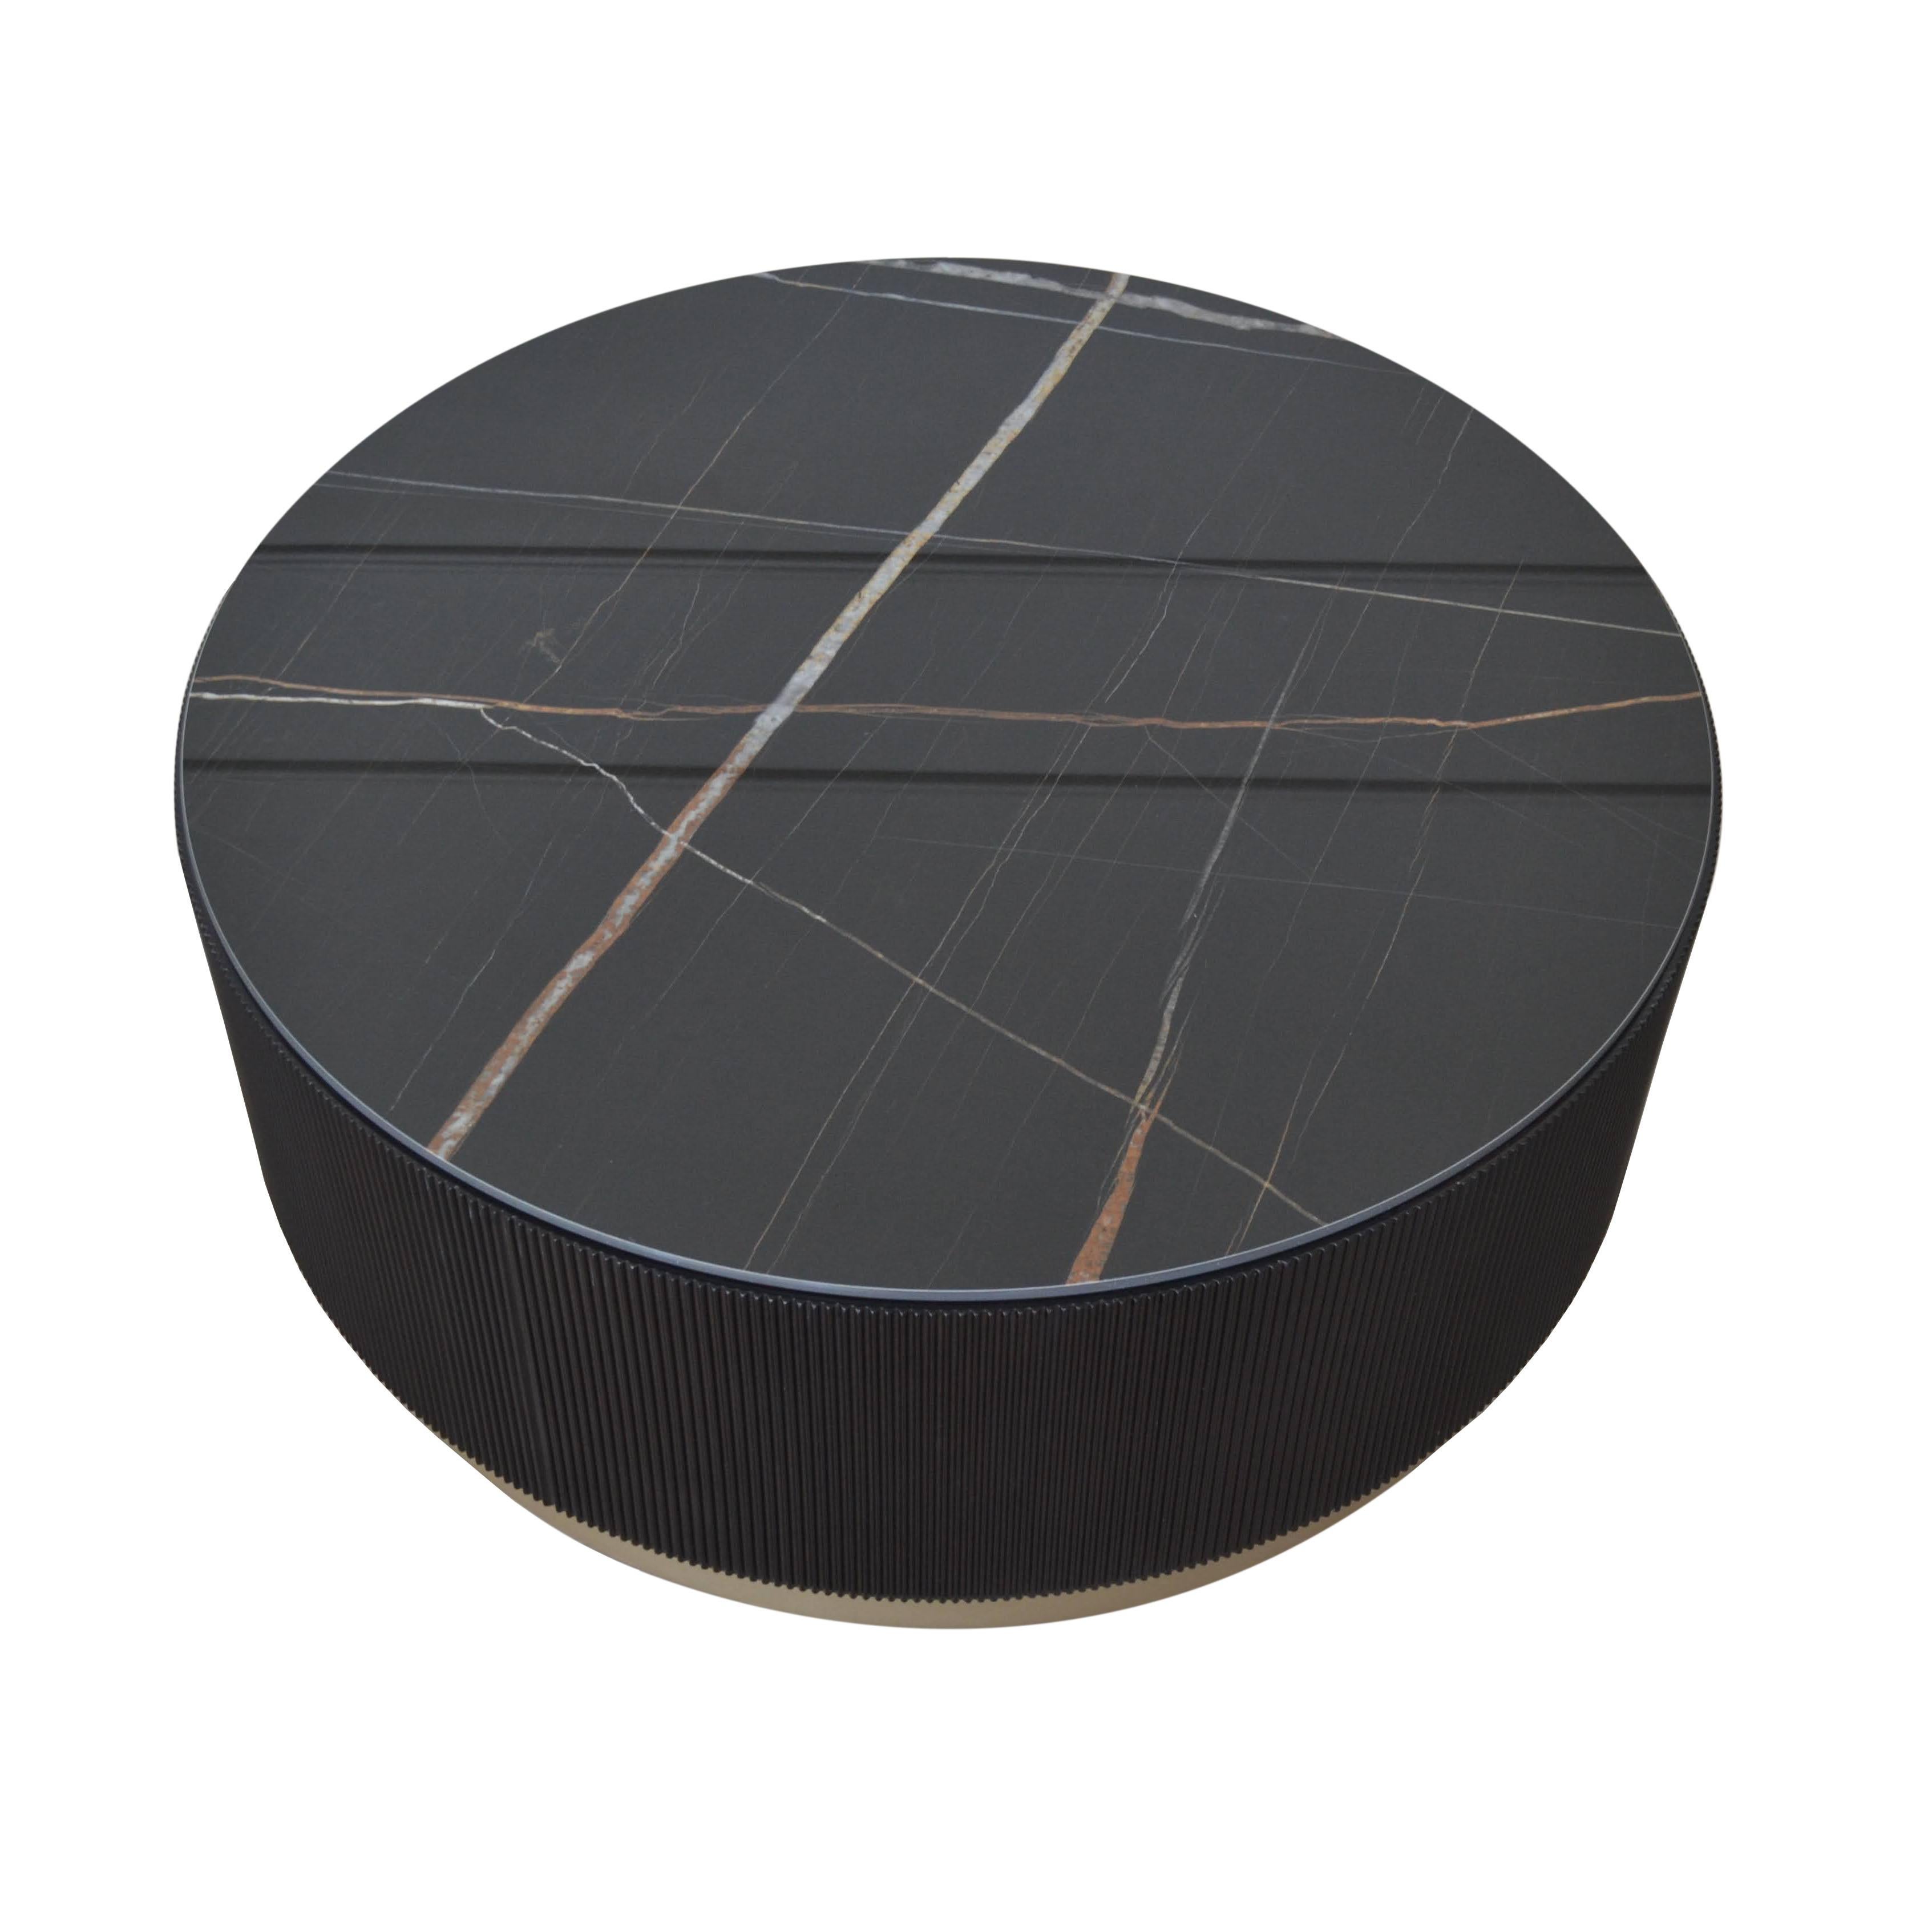 Exceptional in its craftwork, is a centre table that rejects traditional conventions in favour of experimentation. Round ceramic top imitating nero marquina marble is placed on a lacquered base, creating a sense of movement that evokes the motion of